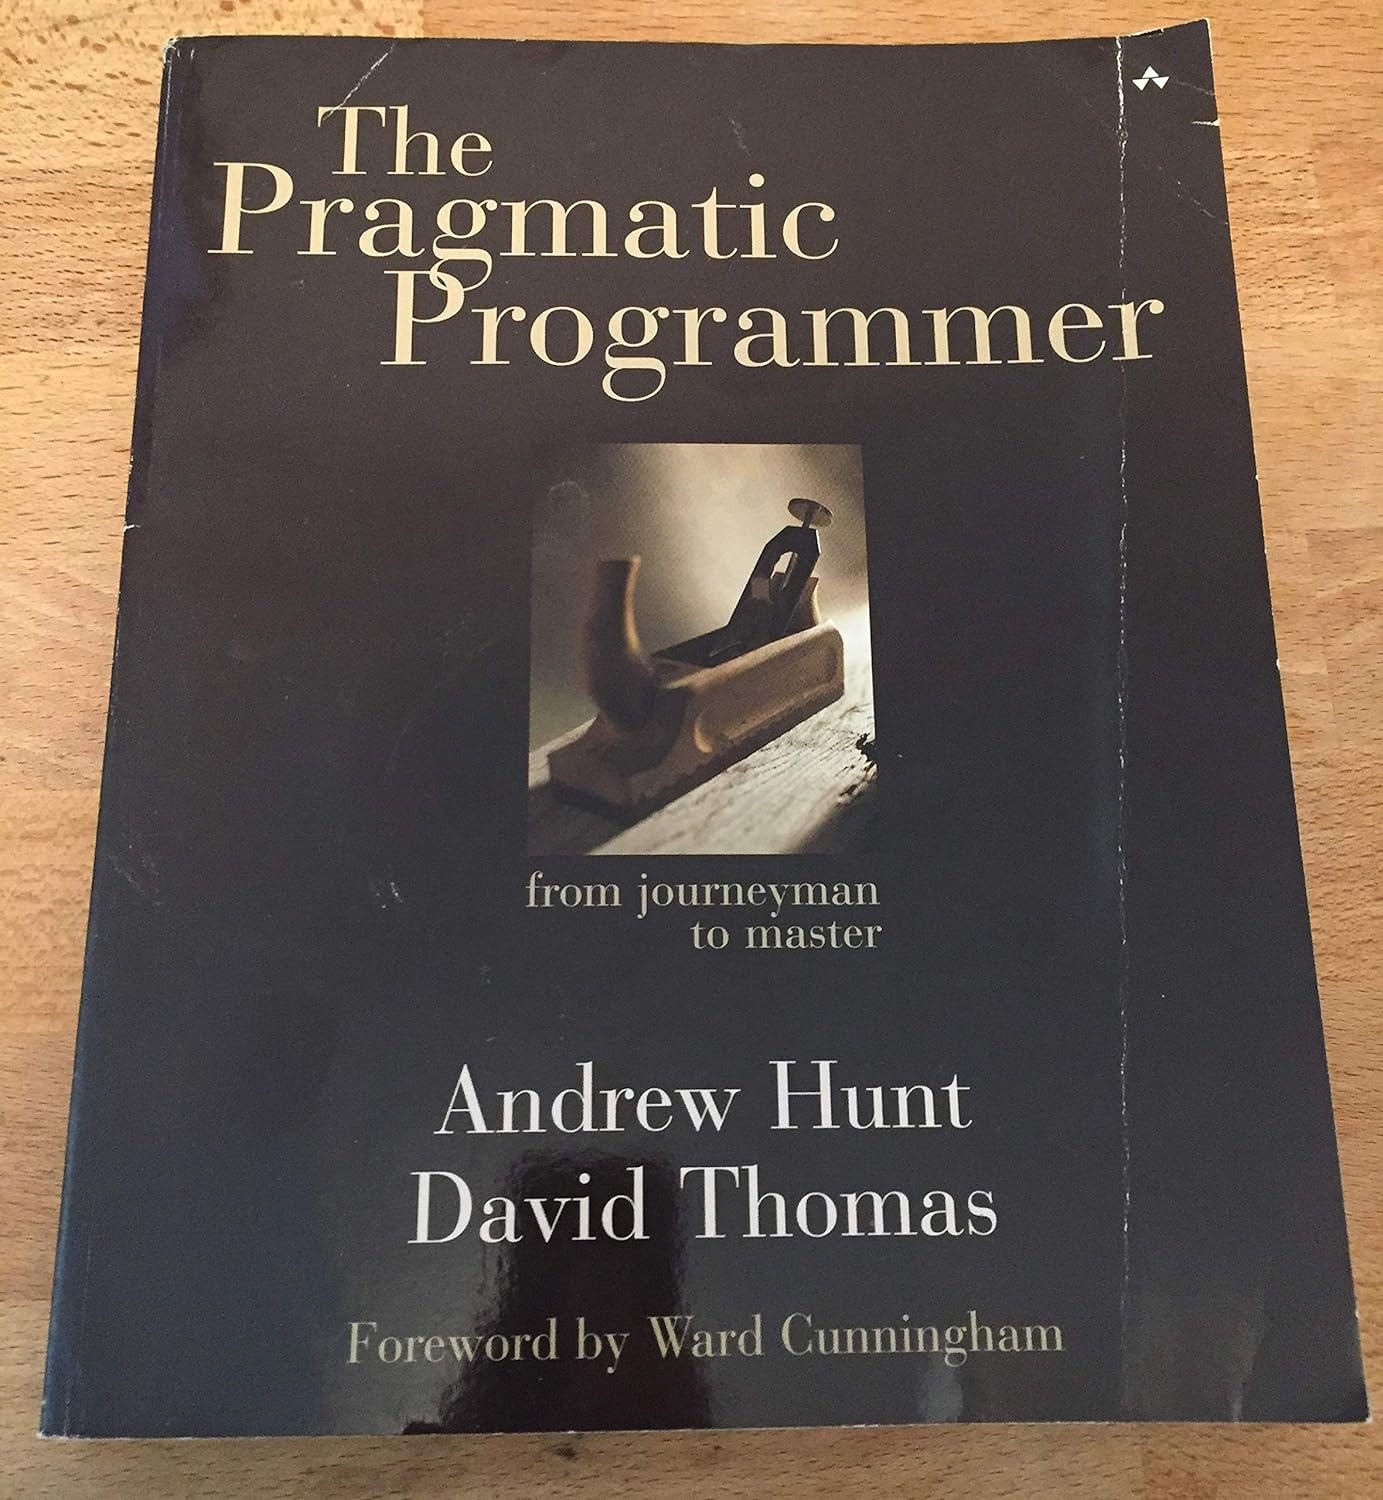 Cover of The Pragmatic Programmer: From Journeyman to Master by Andrew Hunt and David Thomas.